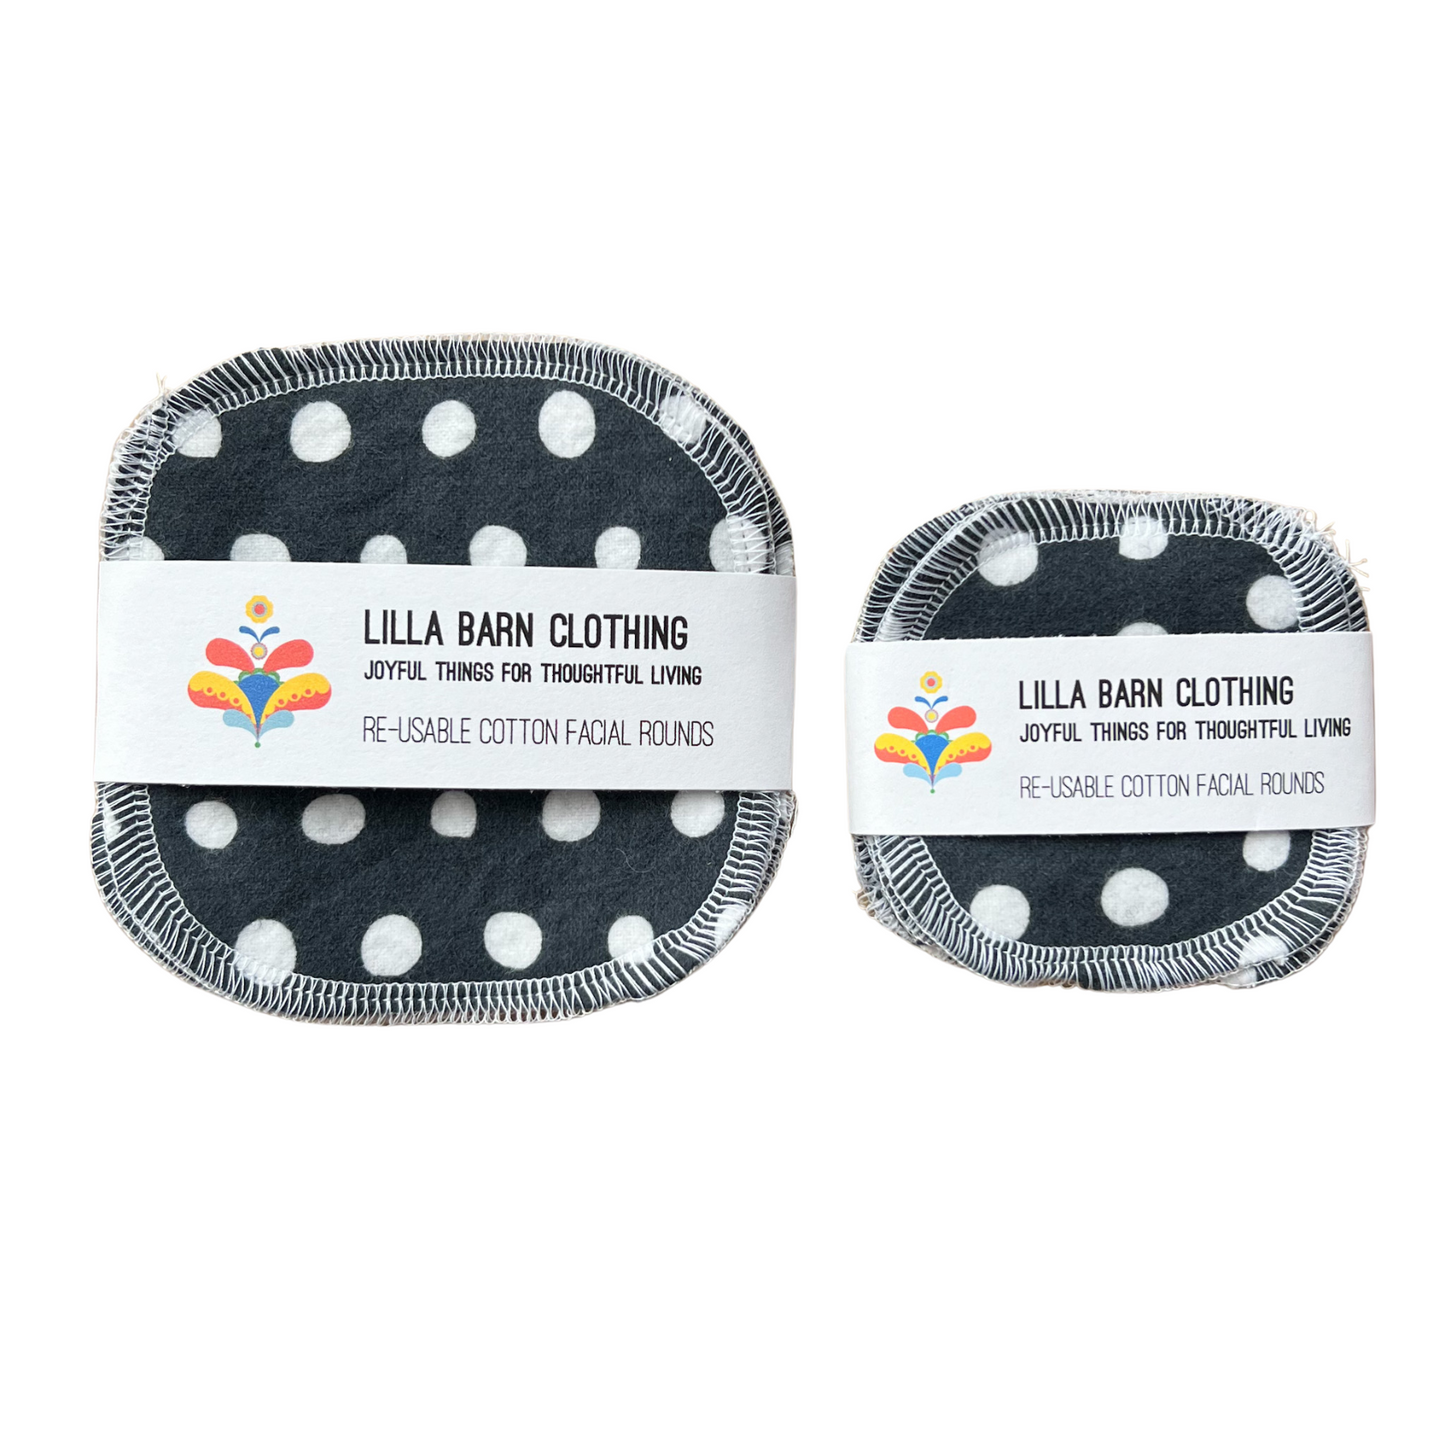 Large Re-usable Cotton Facial Rounds - Pack of 4 Rounds